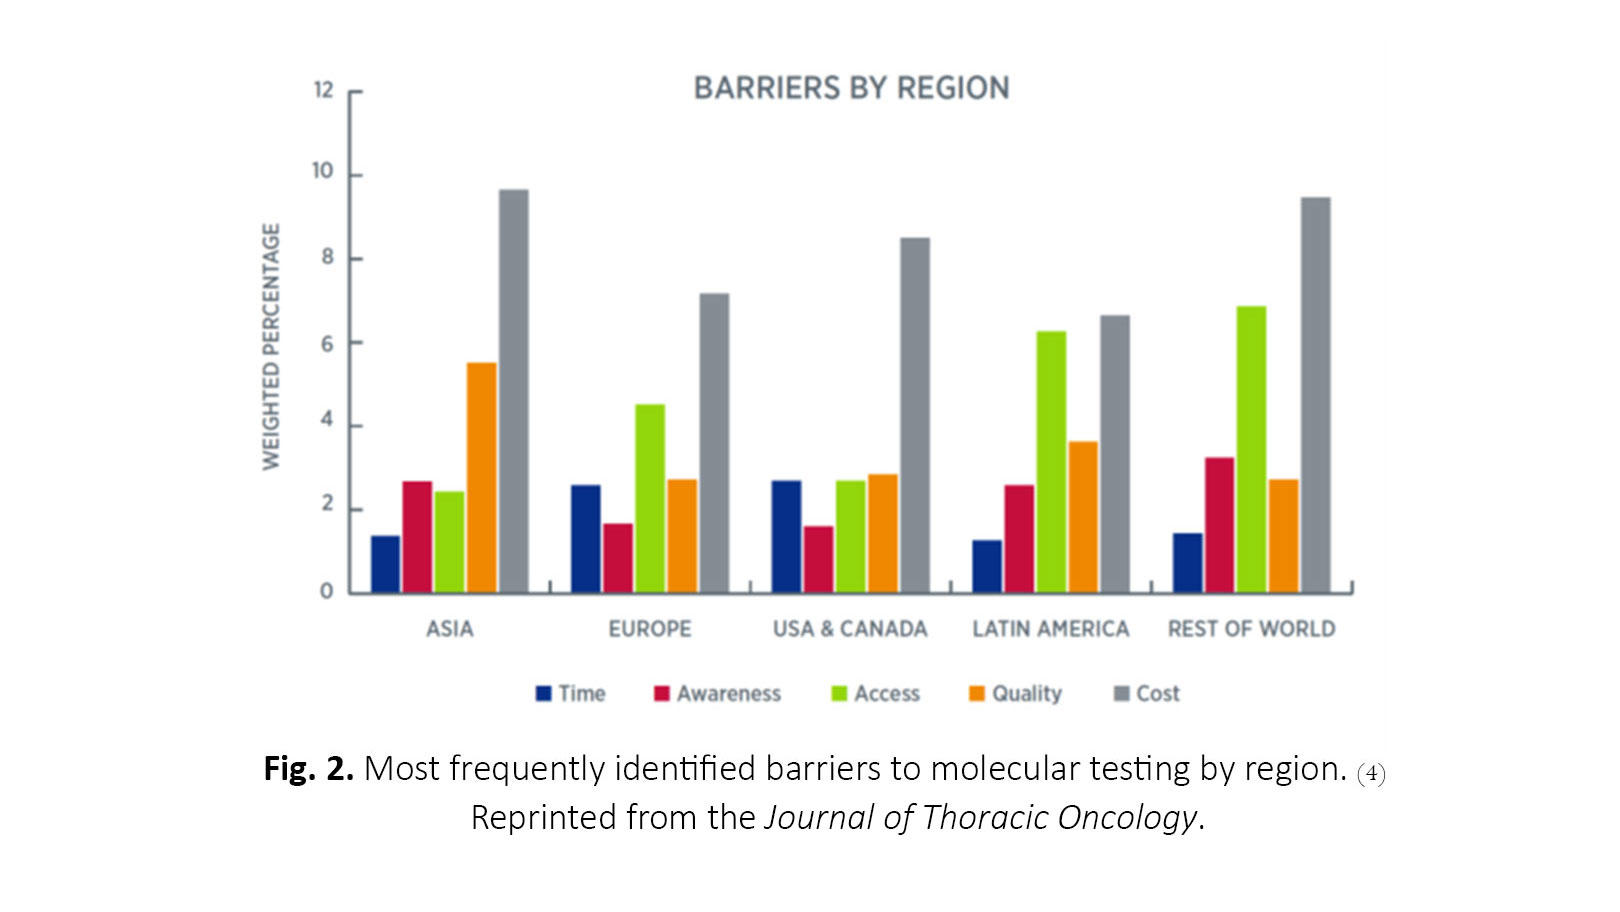 Fig. 2. Most frequently identified barriers to molecular testing by region.